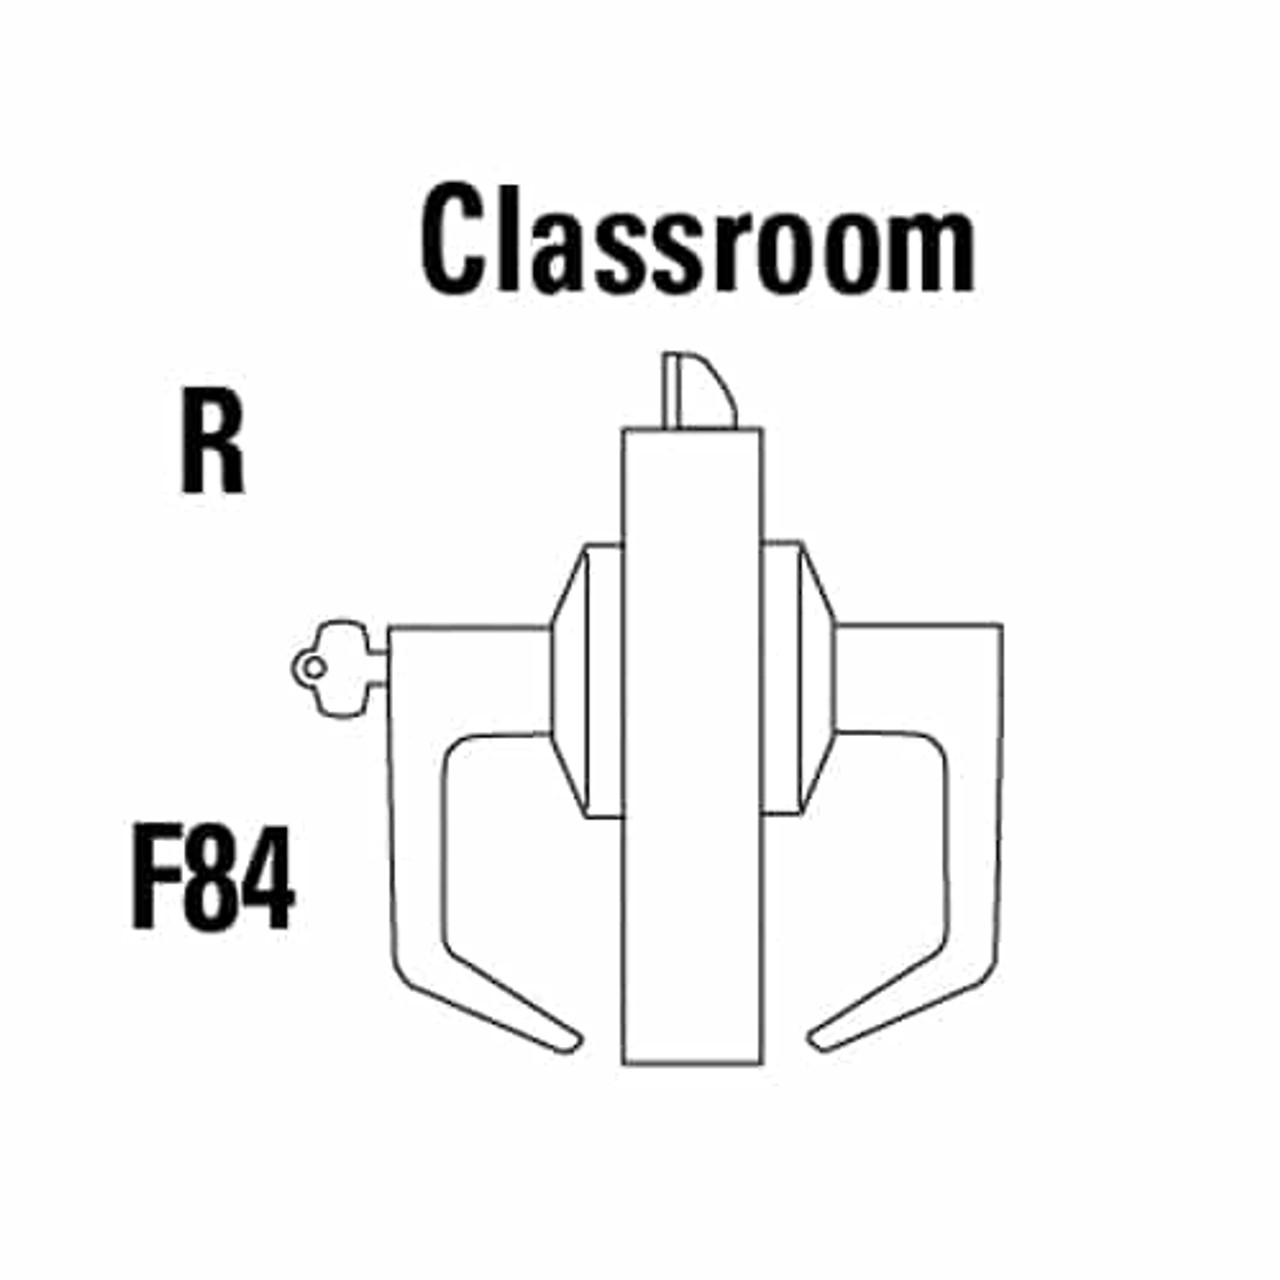 9K37R15DS3613 Best 9K Series Classroom Cylindrical Lever Locks with Contour Angle with Return Lever Design Accept 7 Pin Best Core in Oil Rubbed Bronze